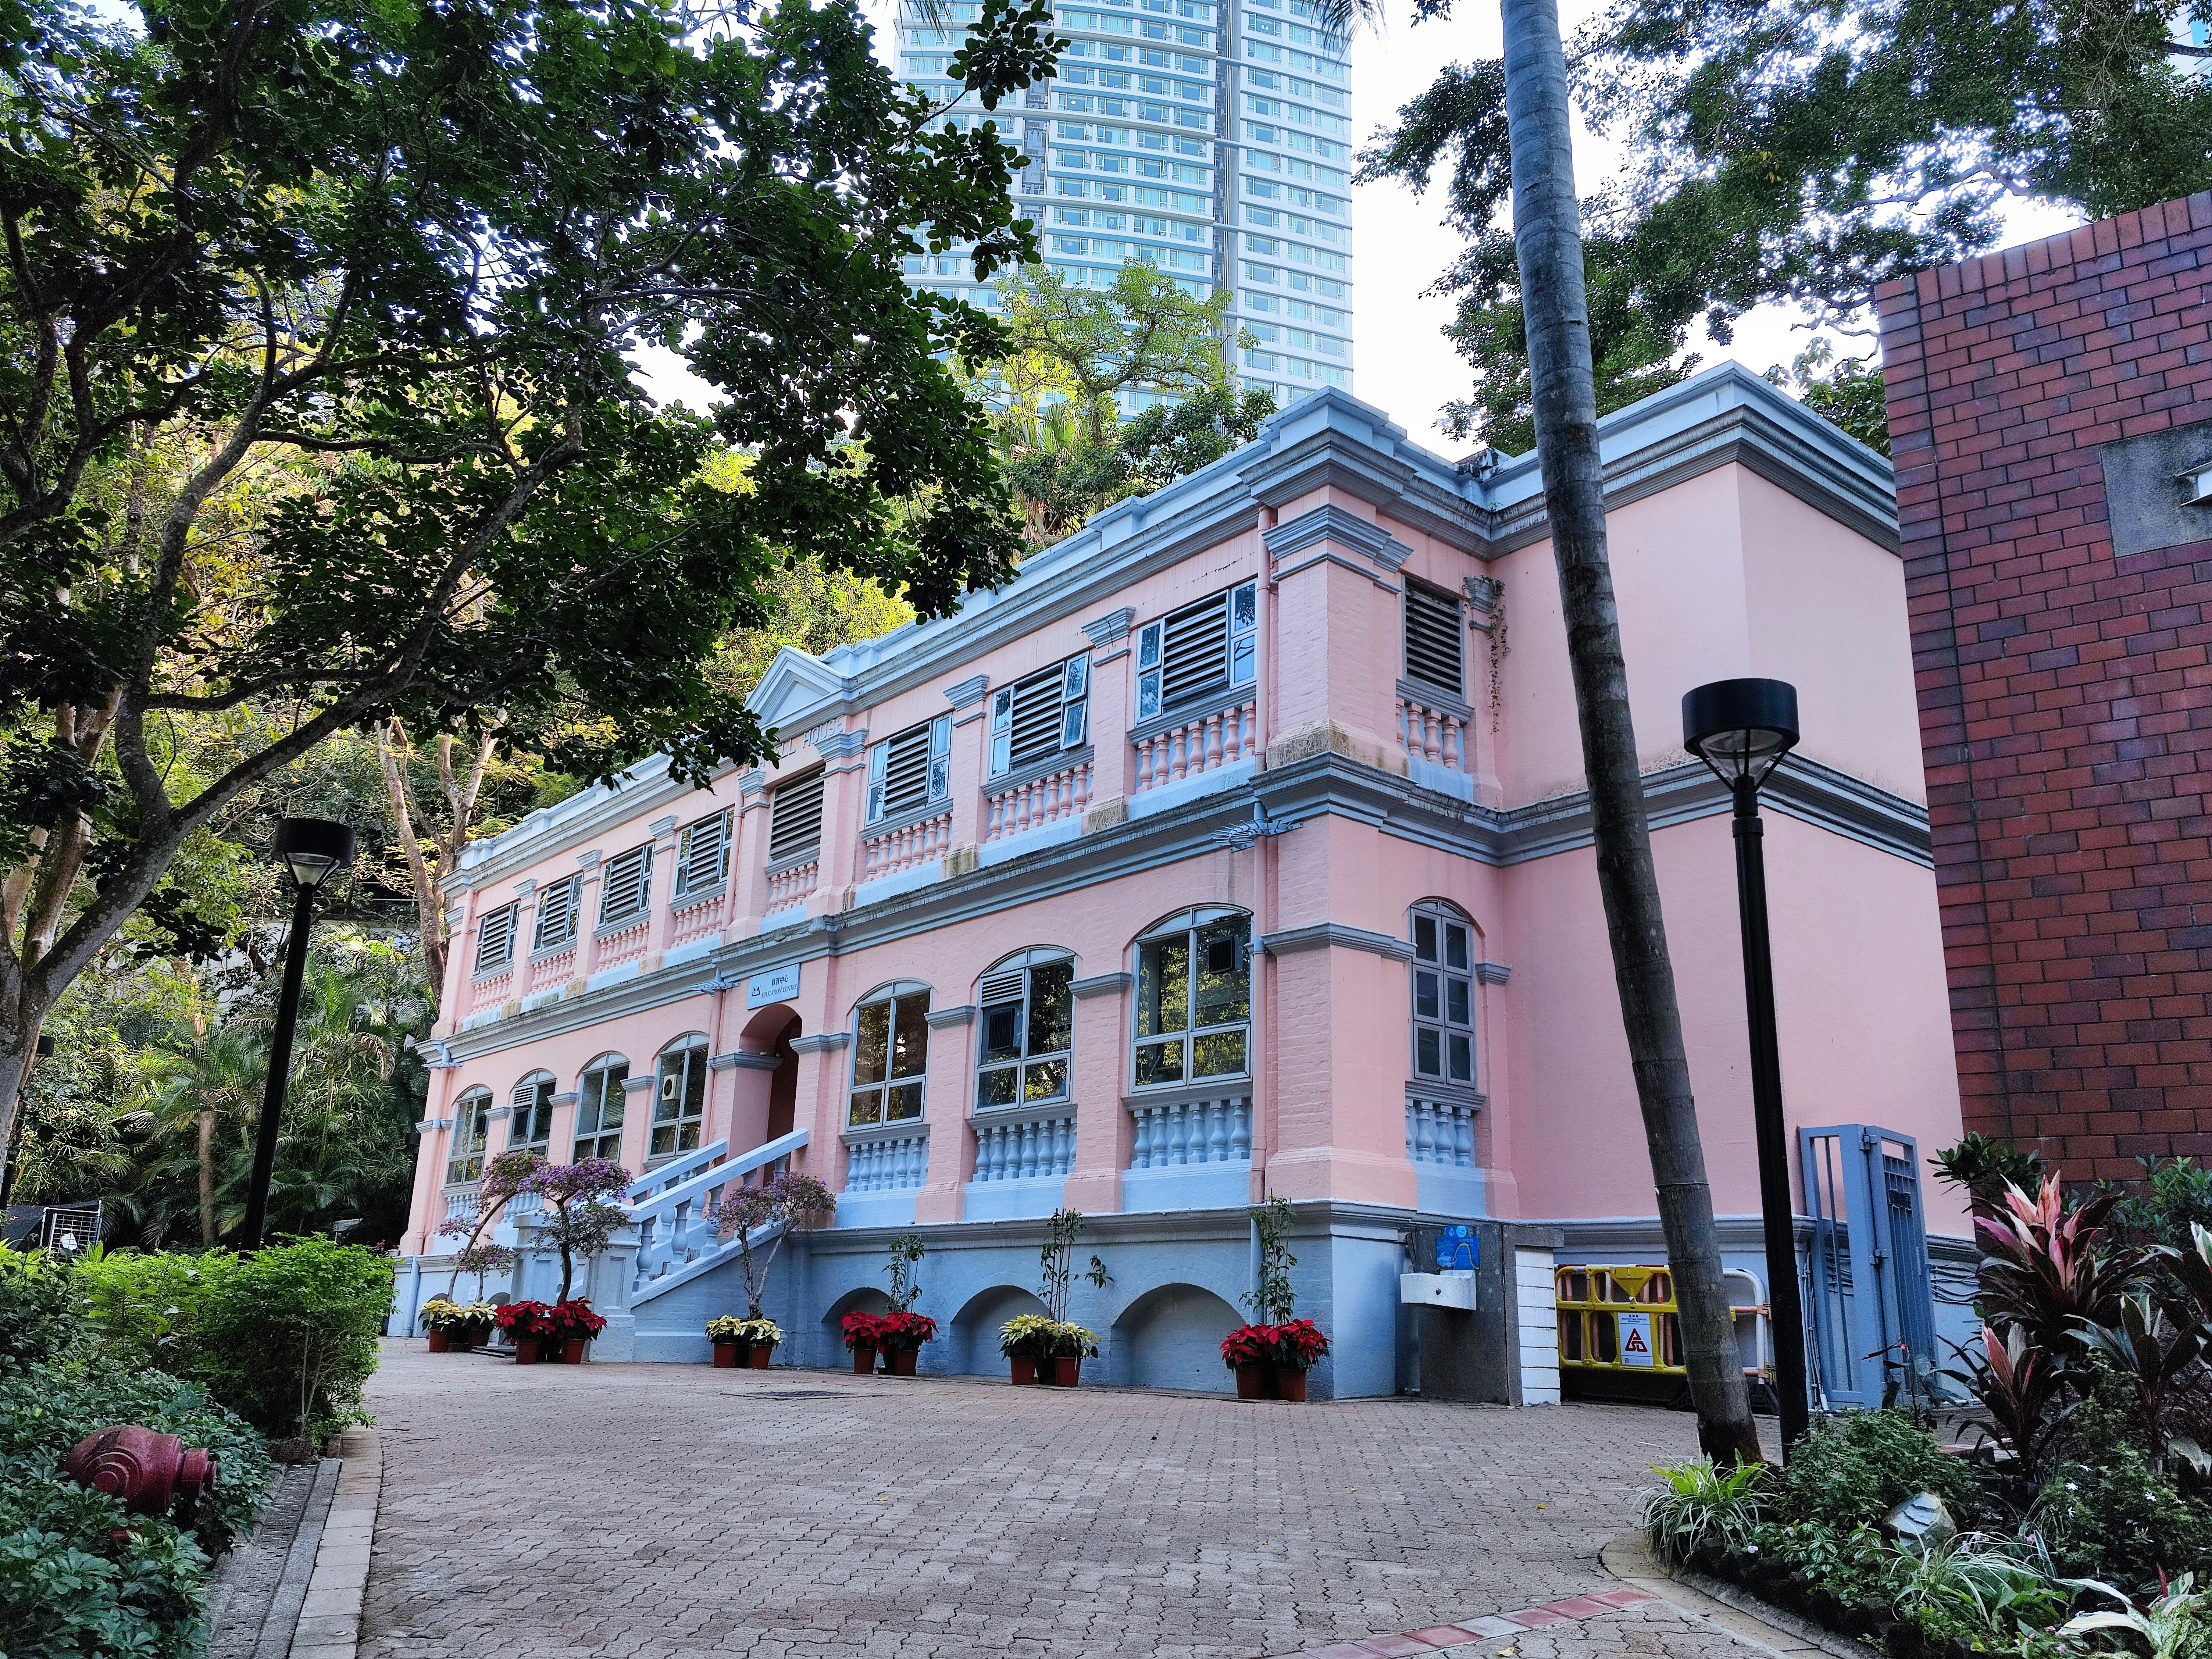 Wavell Block in Hong Kong Park of Hong Kong. It was the staff quarters for married officers of the British Army. Hong Kong Park was built on the former Victoria Barracks and redeveloped into a park and opened in 1991. Thus various old architectural buildings were renovated and converted into new usages, like this Wavell Block was converted into an education center.